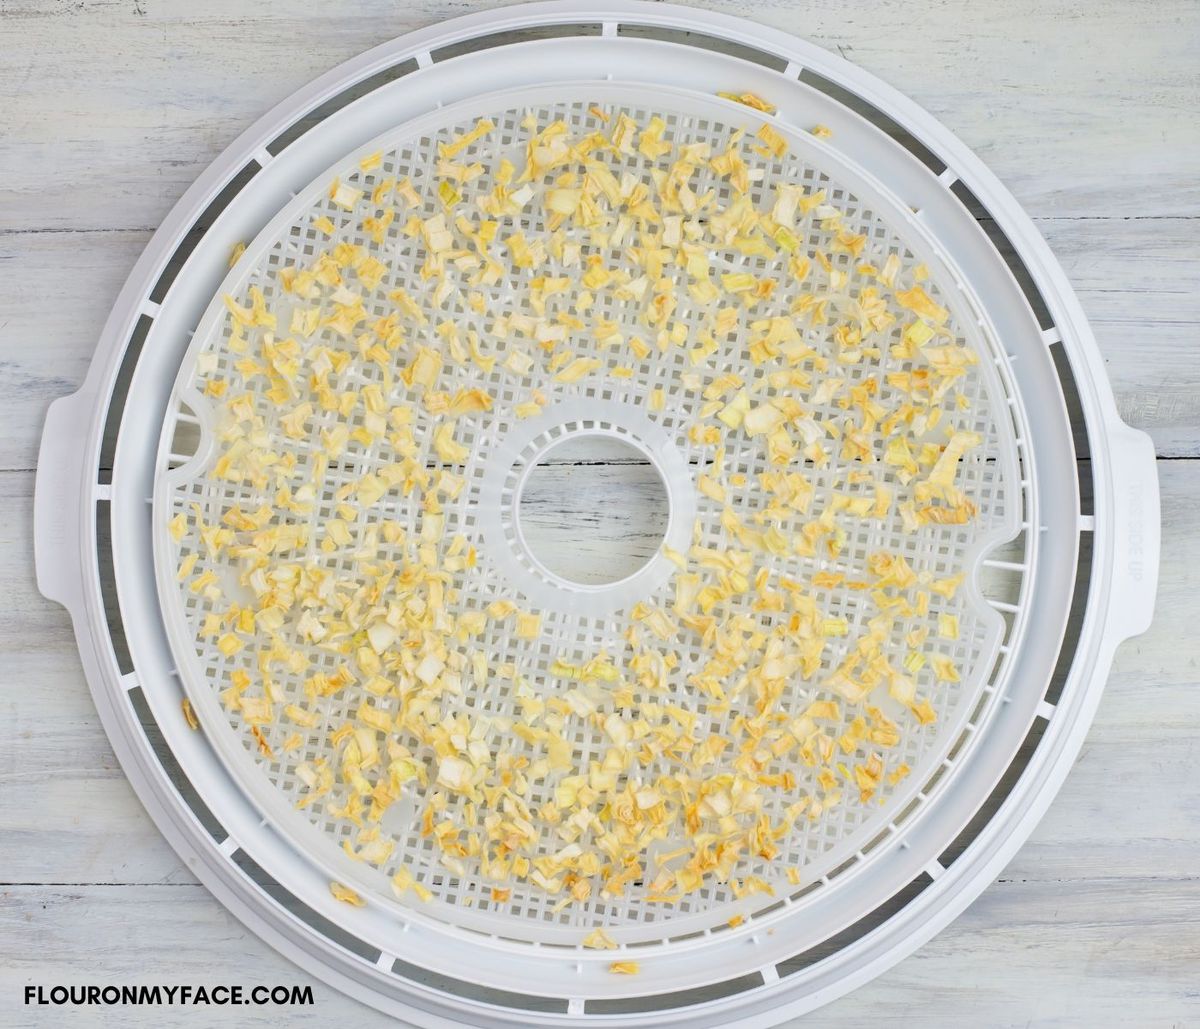 A round dehydrator tray filled with dried onion flakes.